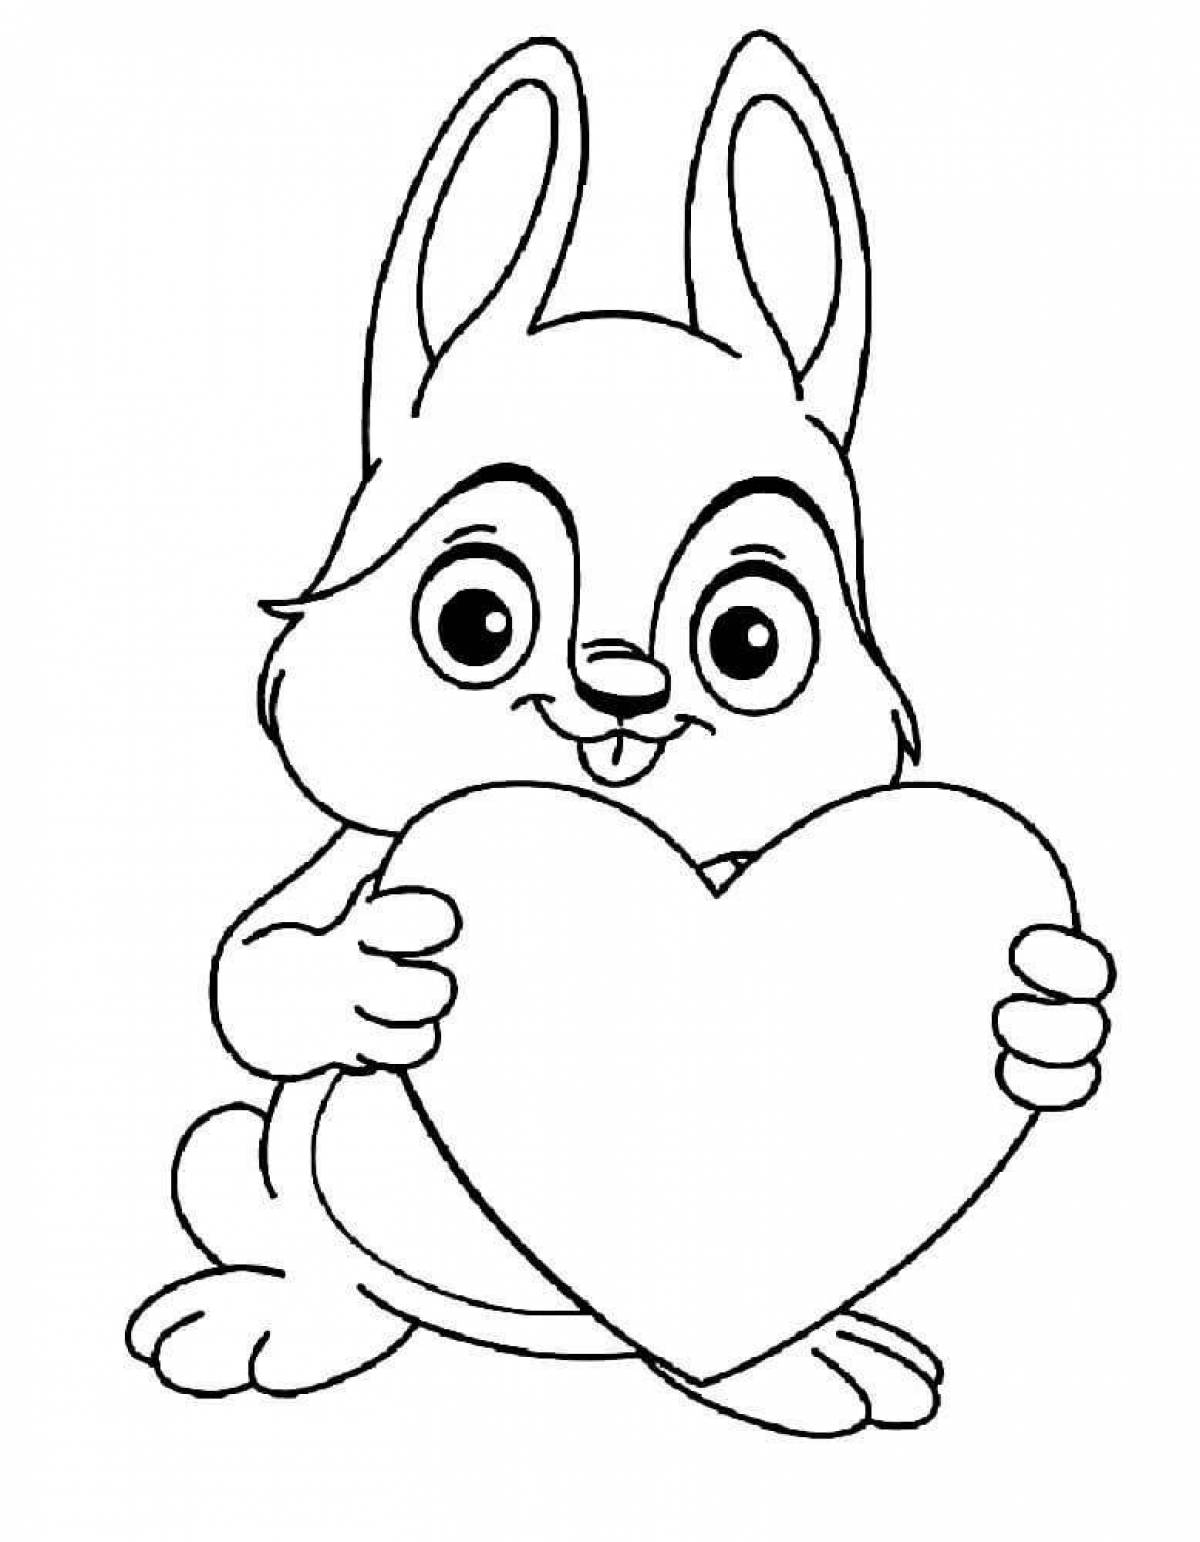 Playful rabbit coloring page